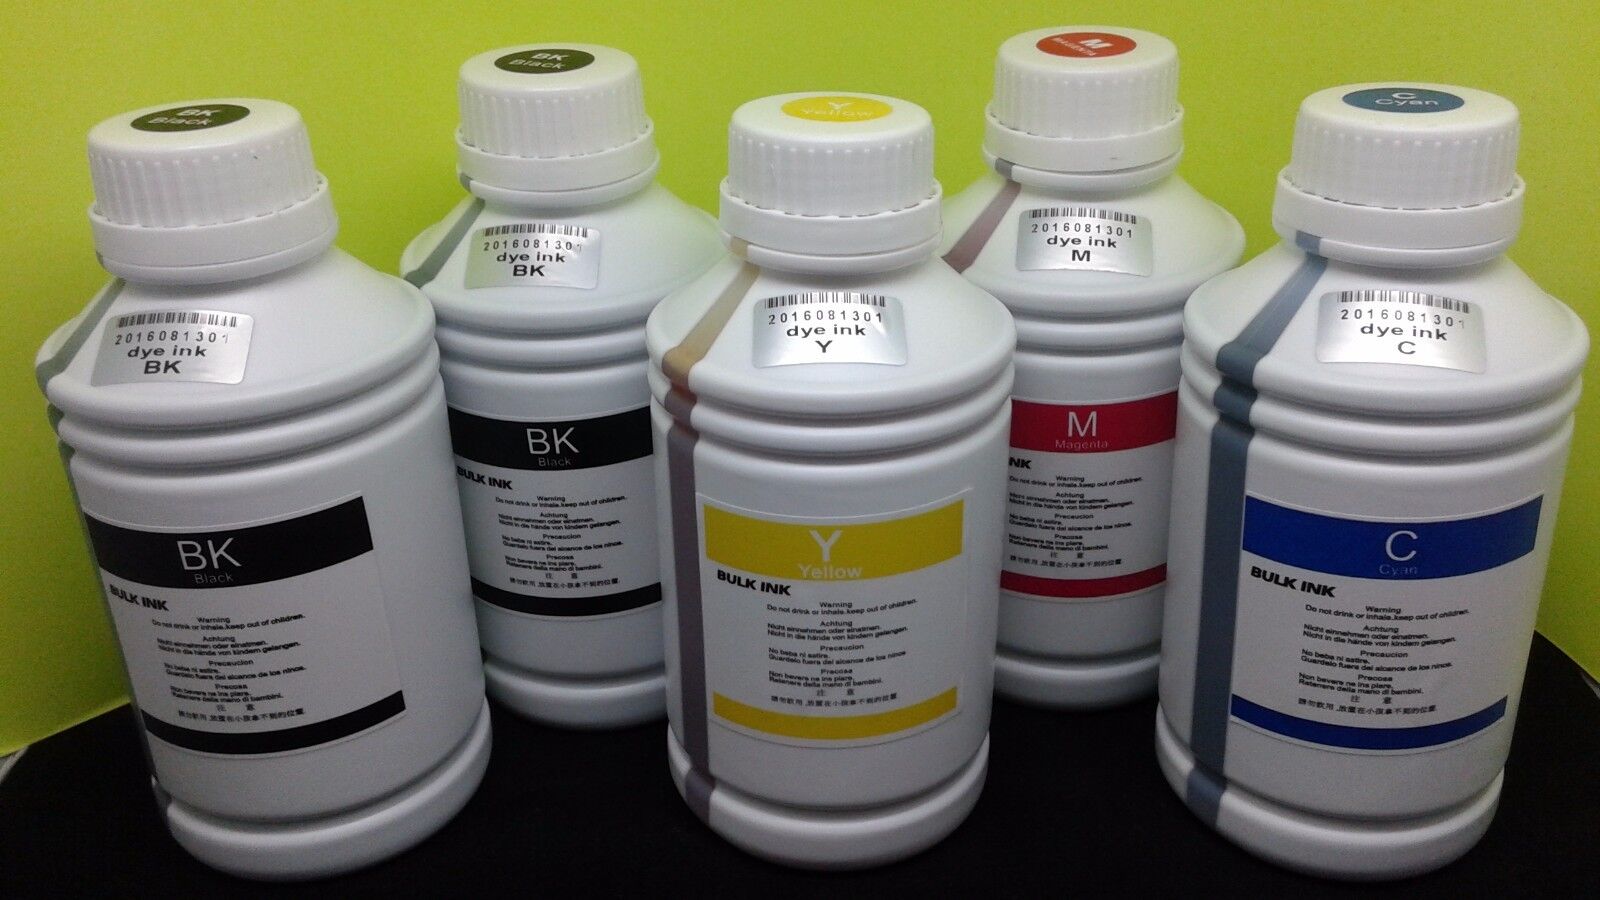 5 x 500ml Refill Bulk Dye Ink compatible for HP Canon Dell Brother Epson Printer